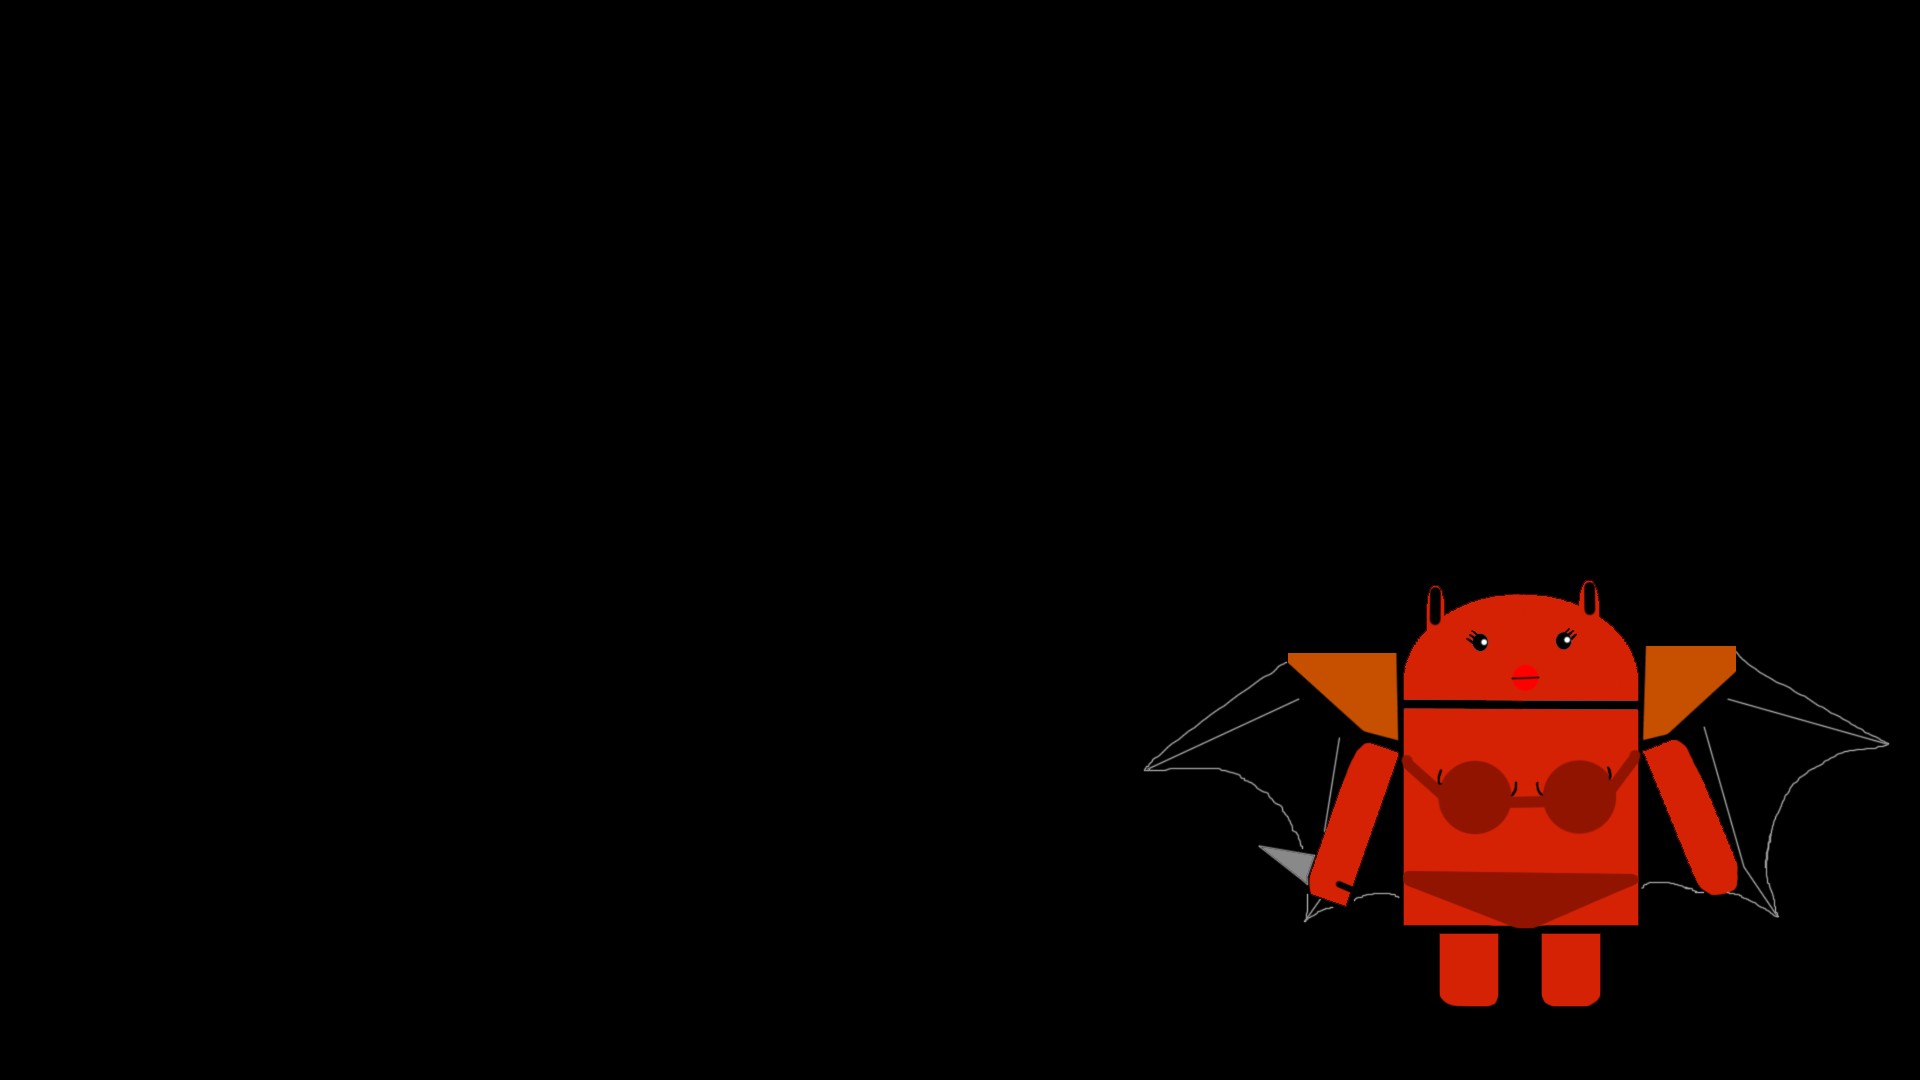 Queen of Pain, Microsoft Windows, Android (operating system), Dota 2, Androidify Wallpaper